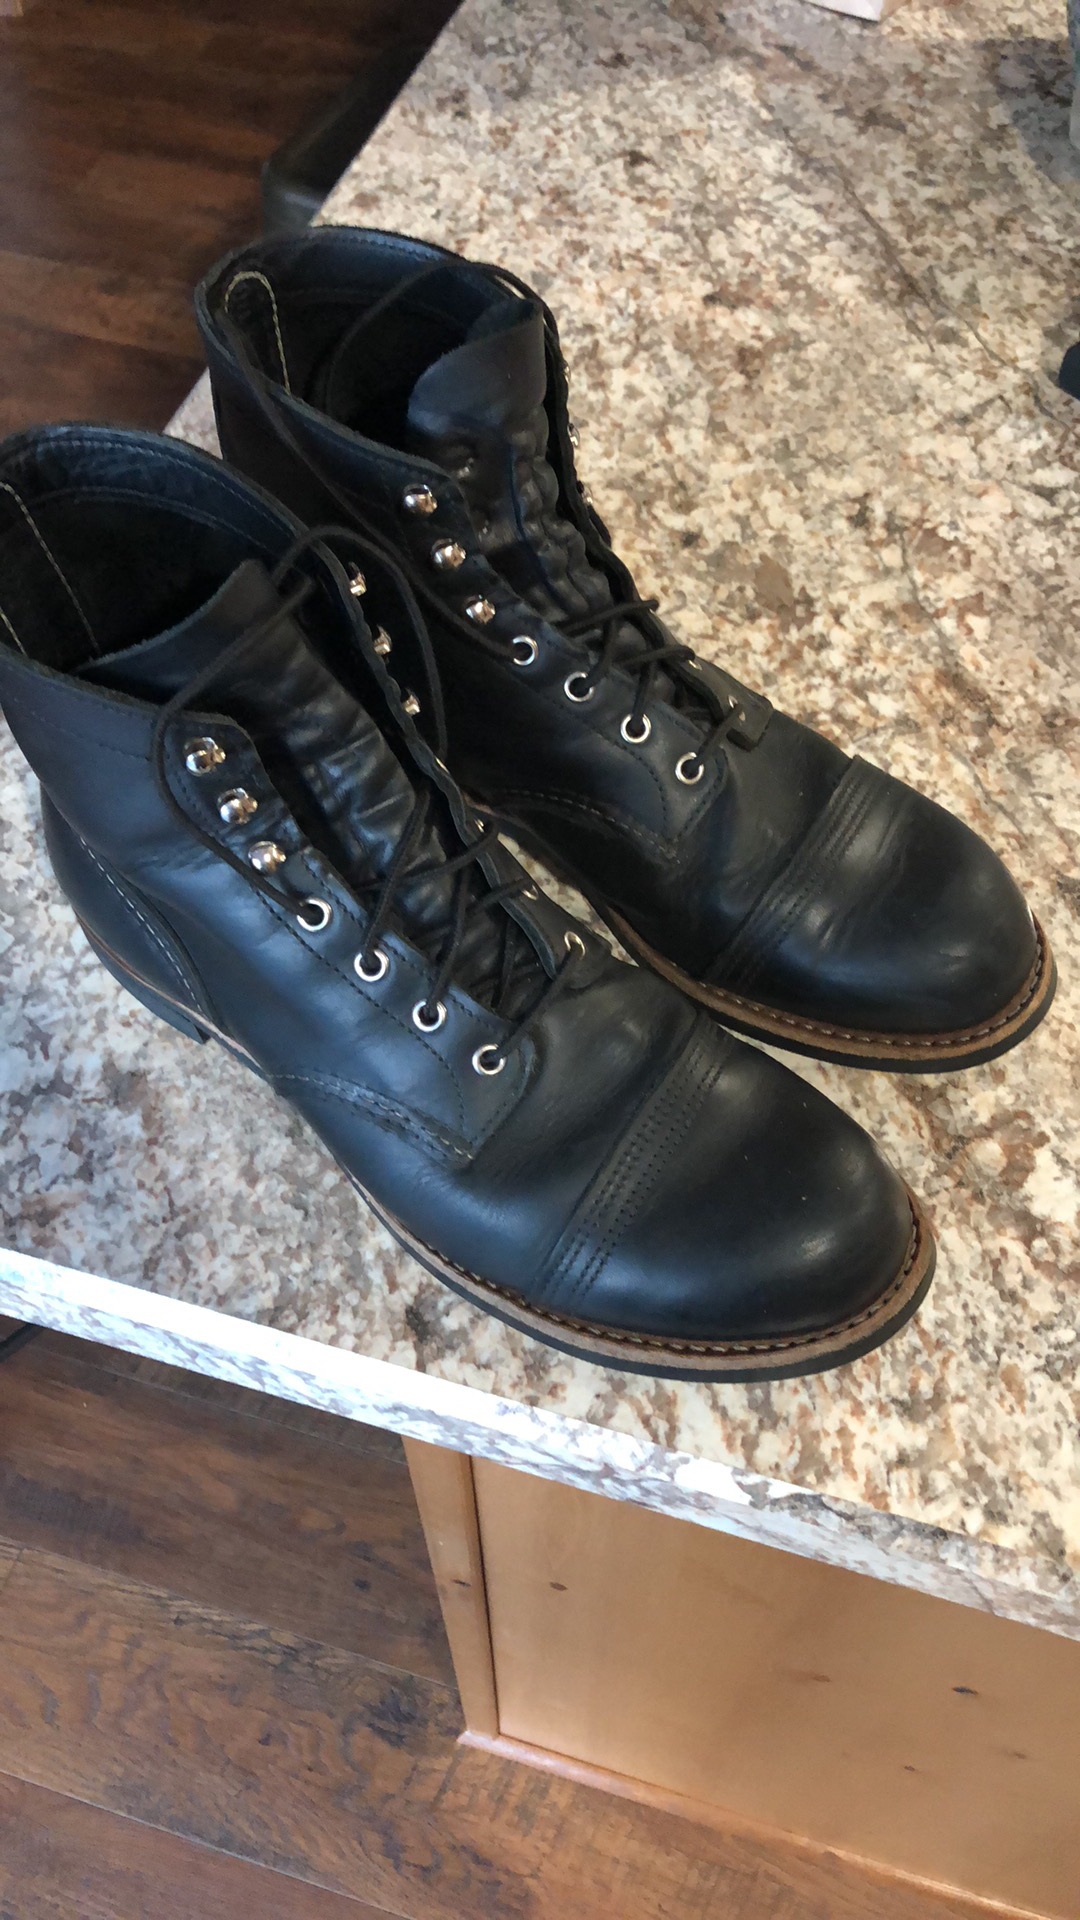 Redwing Iron Ranger boots - SASS Wire Classifieds - SASS Wire Forum